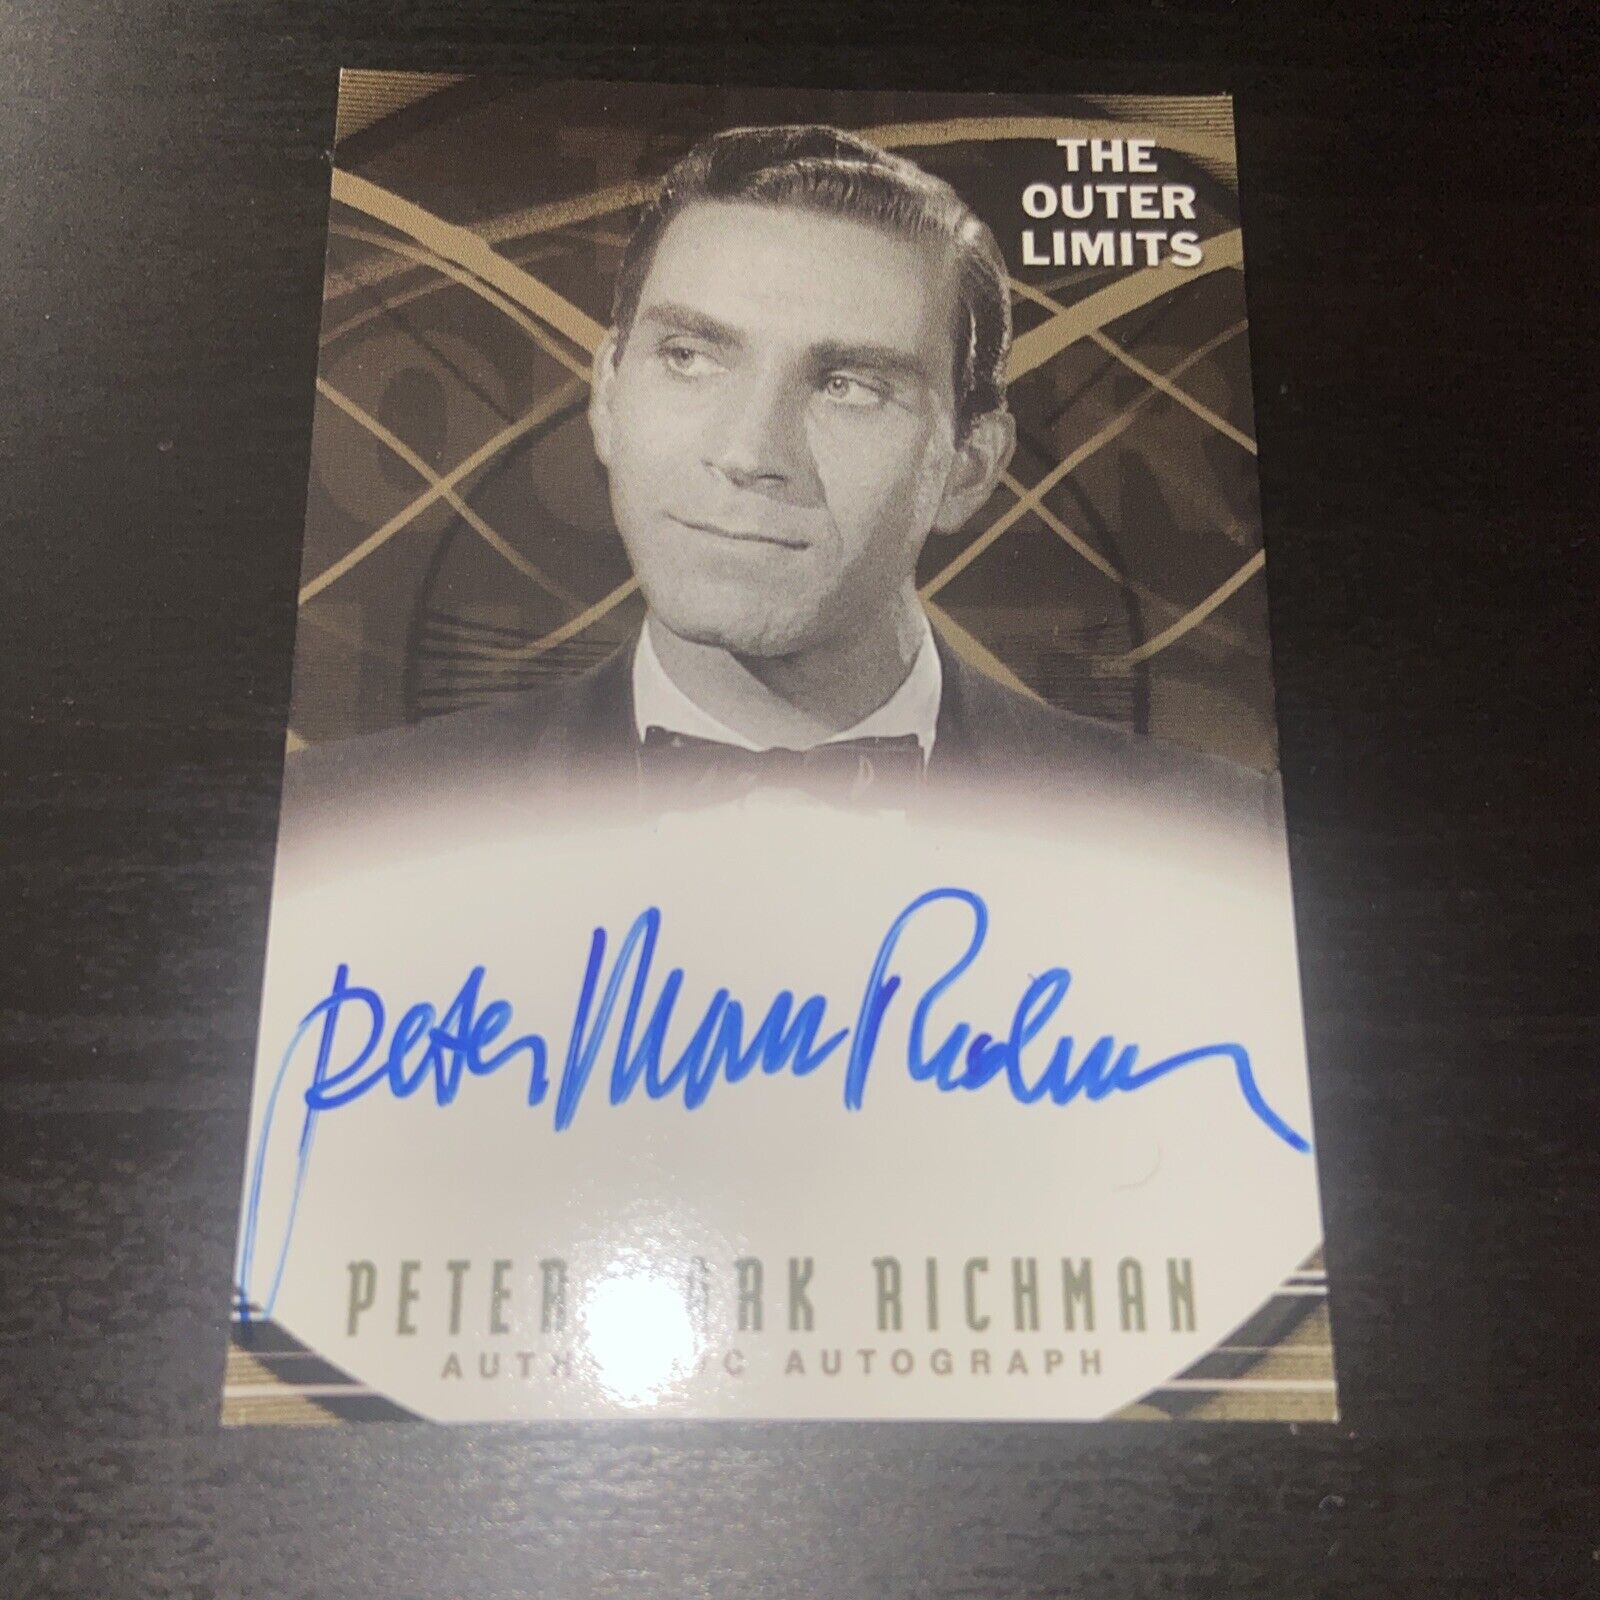 Peter Mark Richman / Ian The Outer Limits Premiere Edition Autograph Card A16